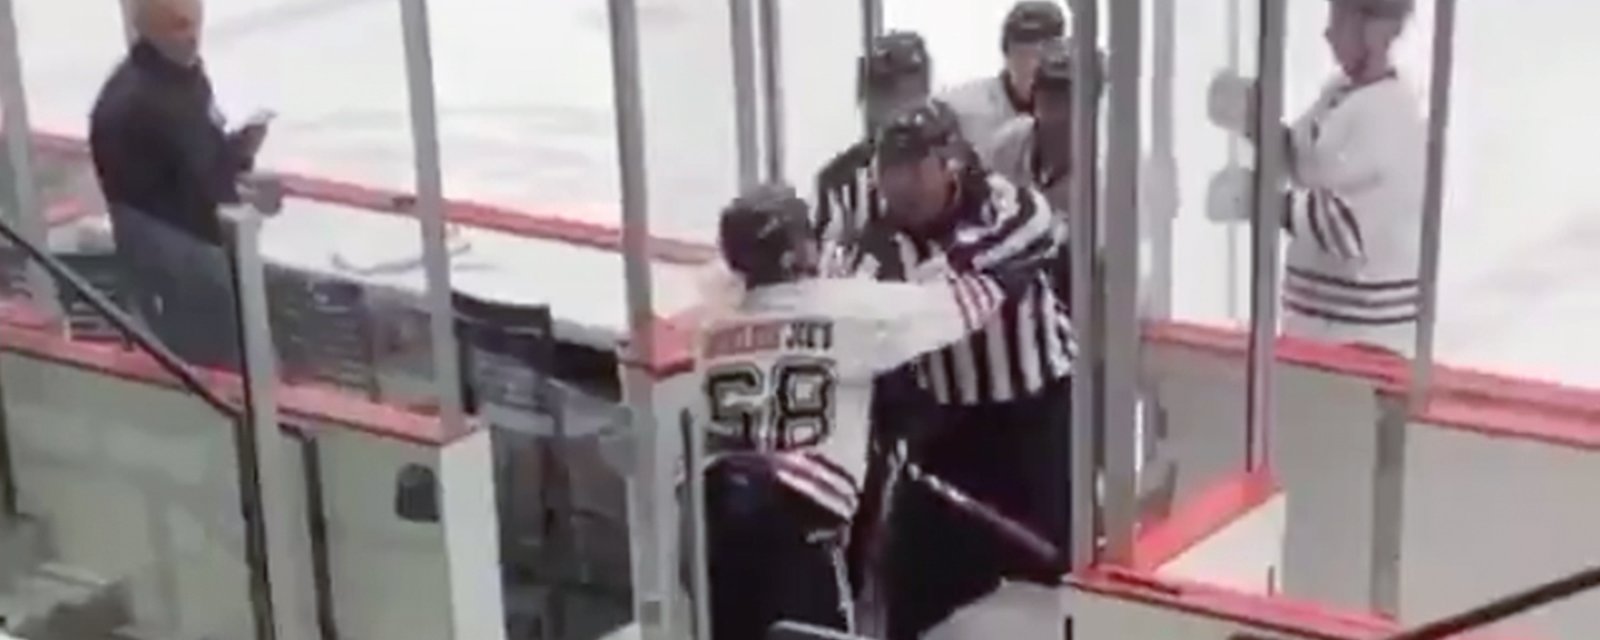 Beer leaguer gets tossed after throwing punches at the ref